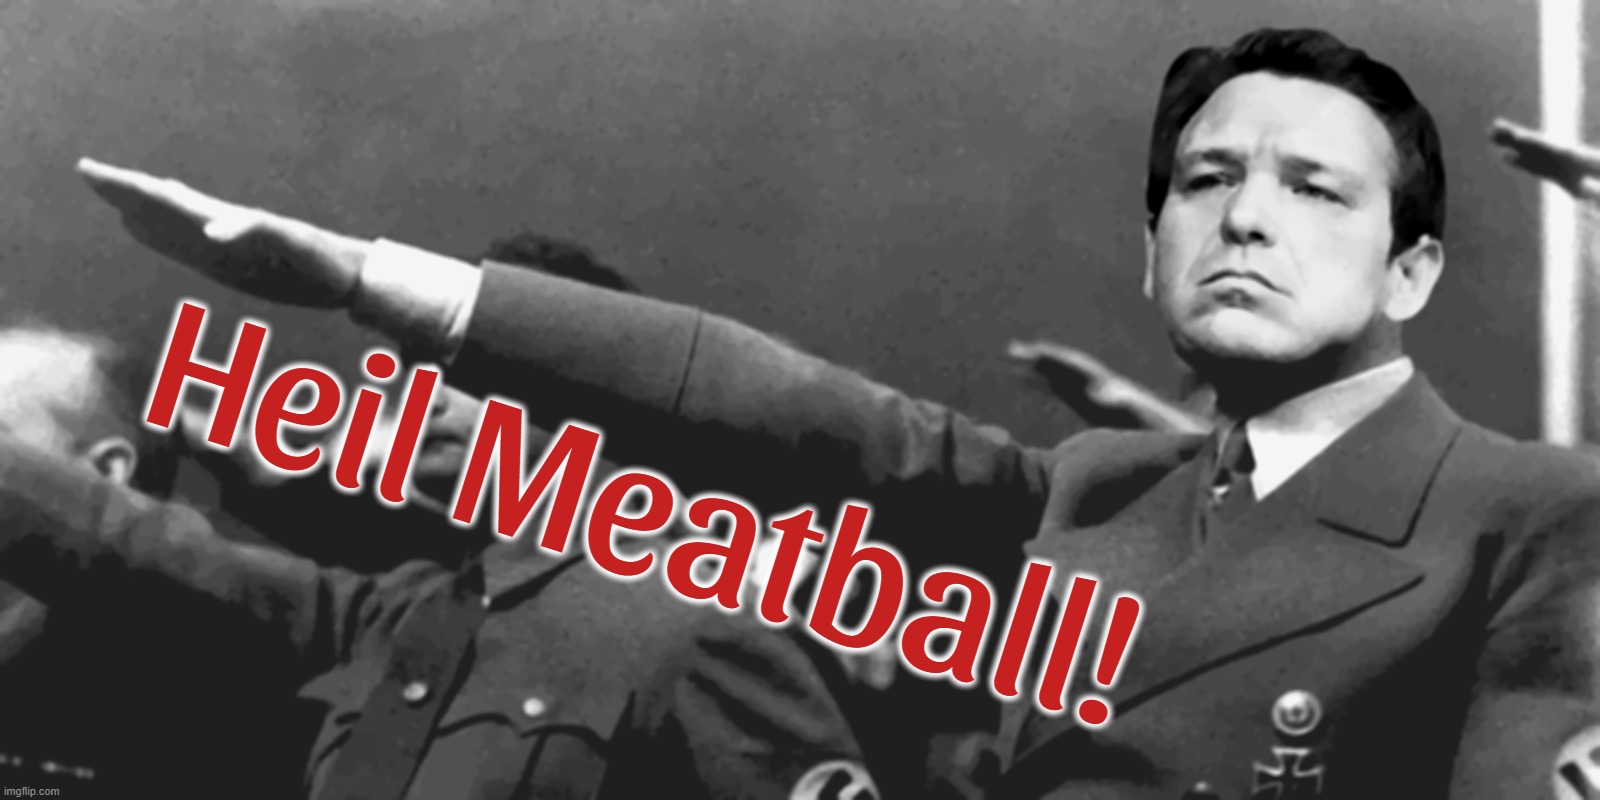 ALL HEIL MEATBALL! | Heil Meatball! | image tagged in authoritarian,fascist,cancel culture,conservative hypocrisy,big government,hypocrisy | made w/ Imgflip meme maker